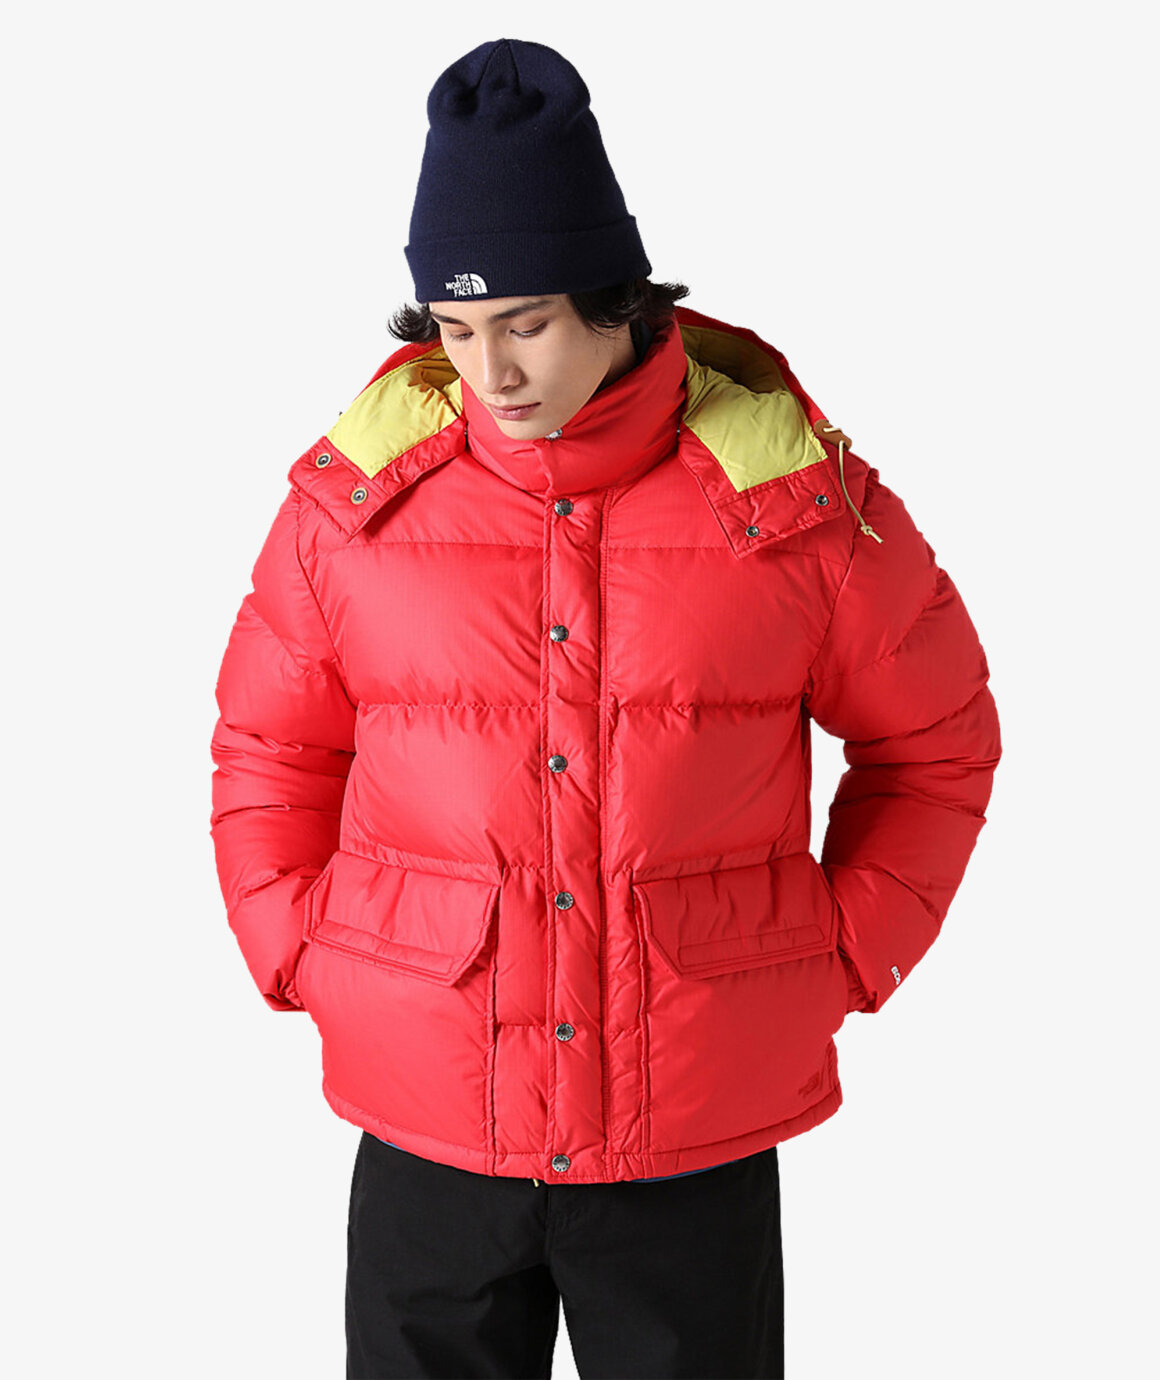 Norse Store | Shipping Worldwide - The North Face 71 Sierra Down Jacket